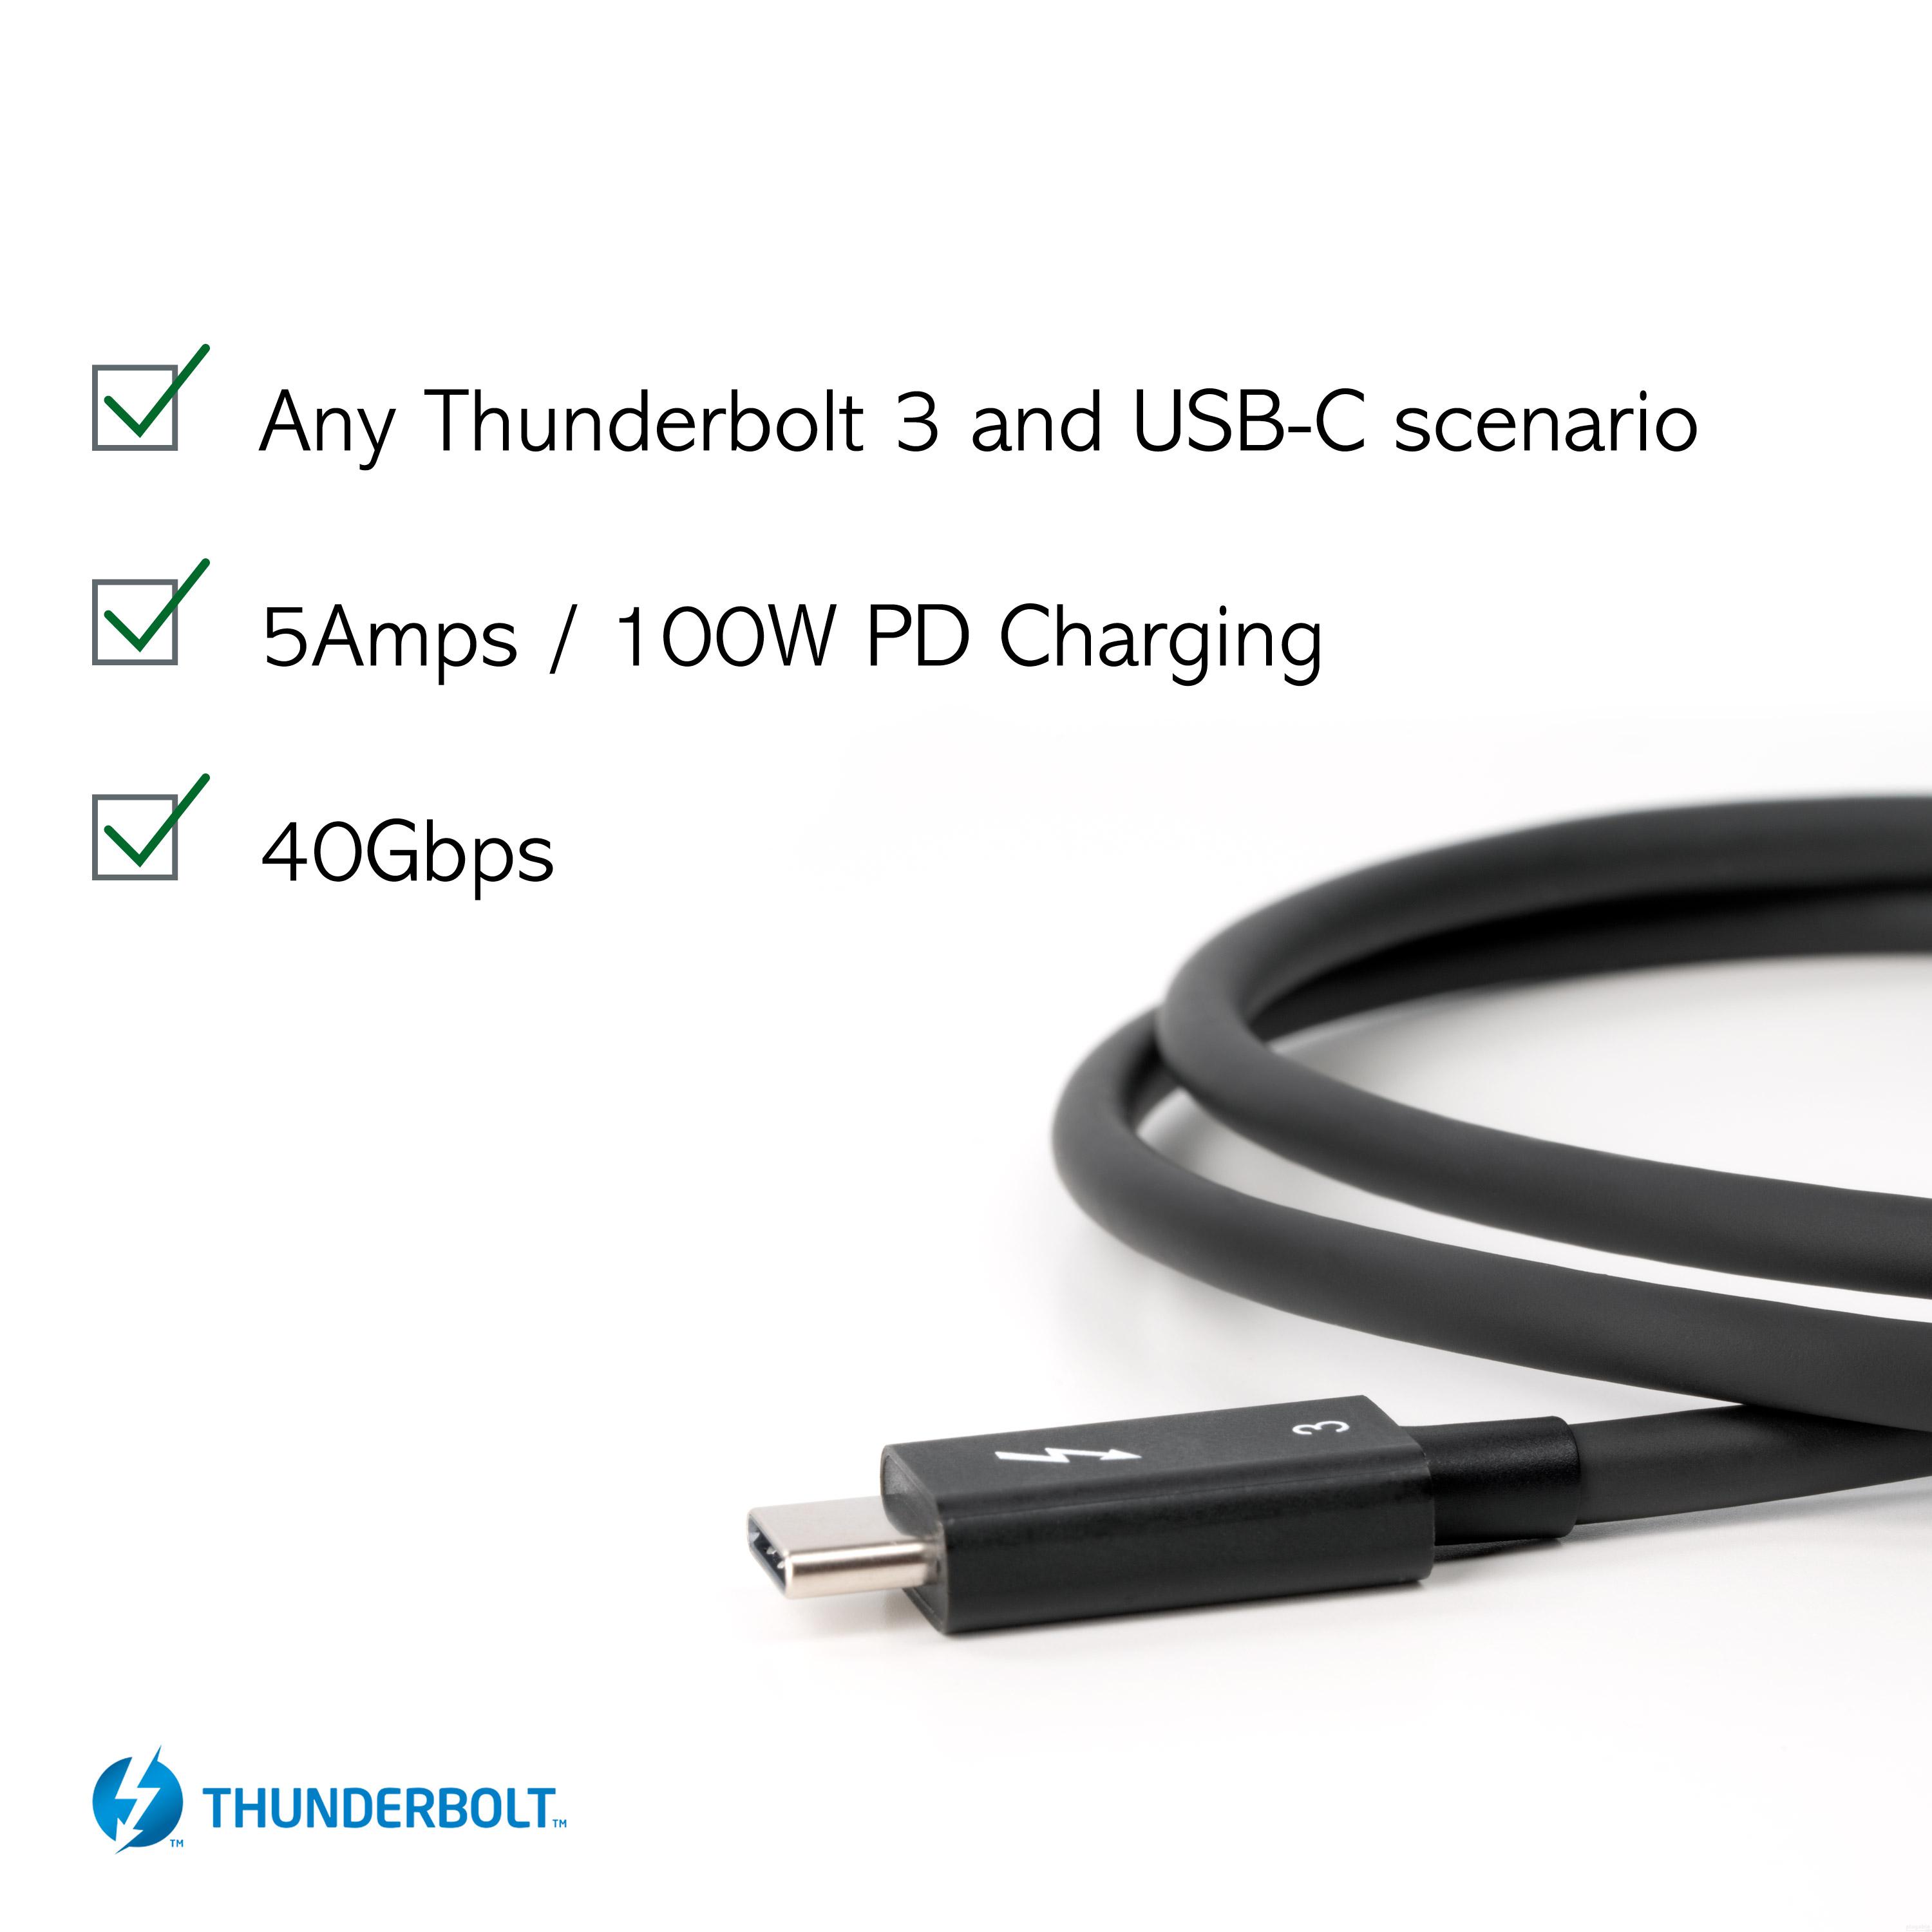 Plugable Thunderbolt 3 Cable 40Gbps Supports 100W (20V, 5A) Charging, 2.6ft / 0.8m USB C Compatible [Thunderbolt 3 Certified] - image 3 of 8